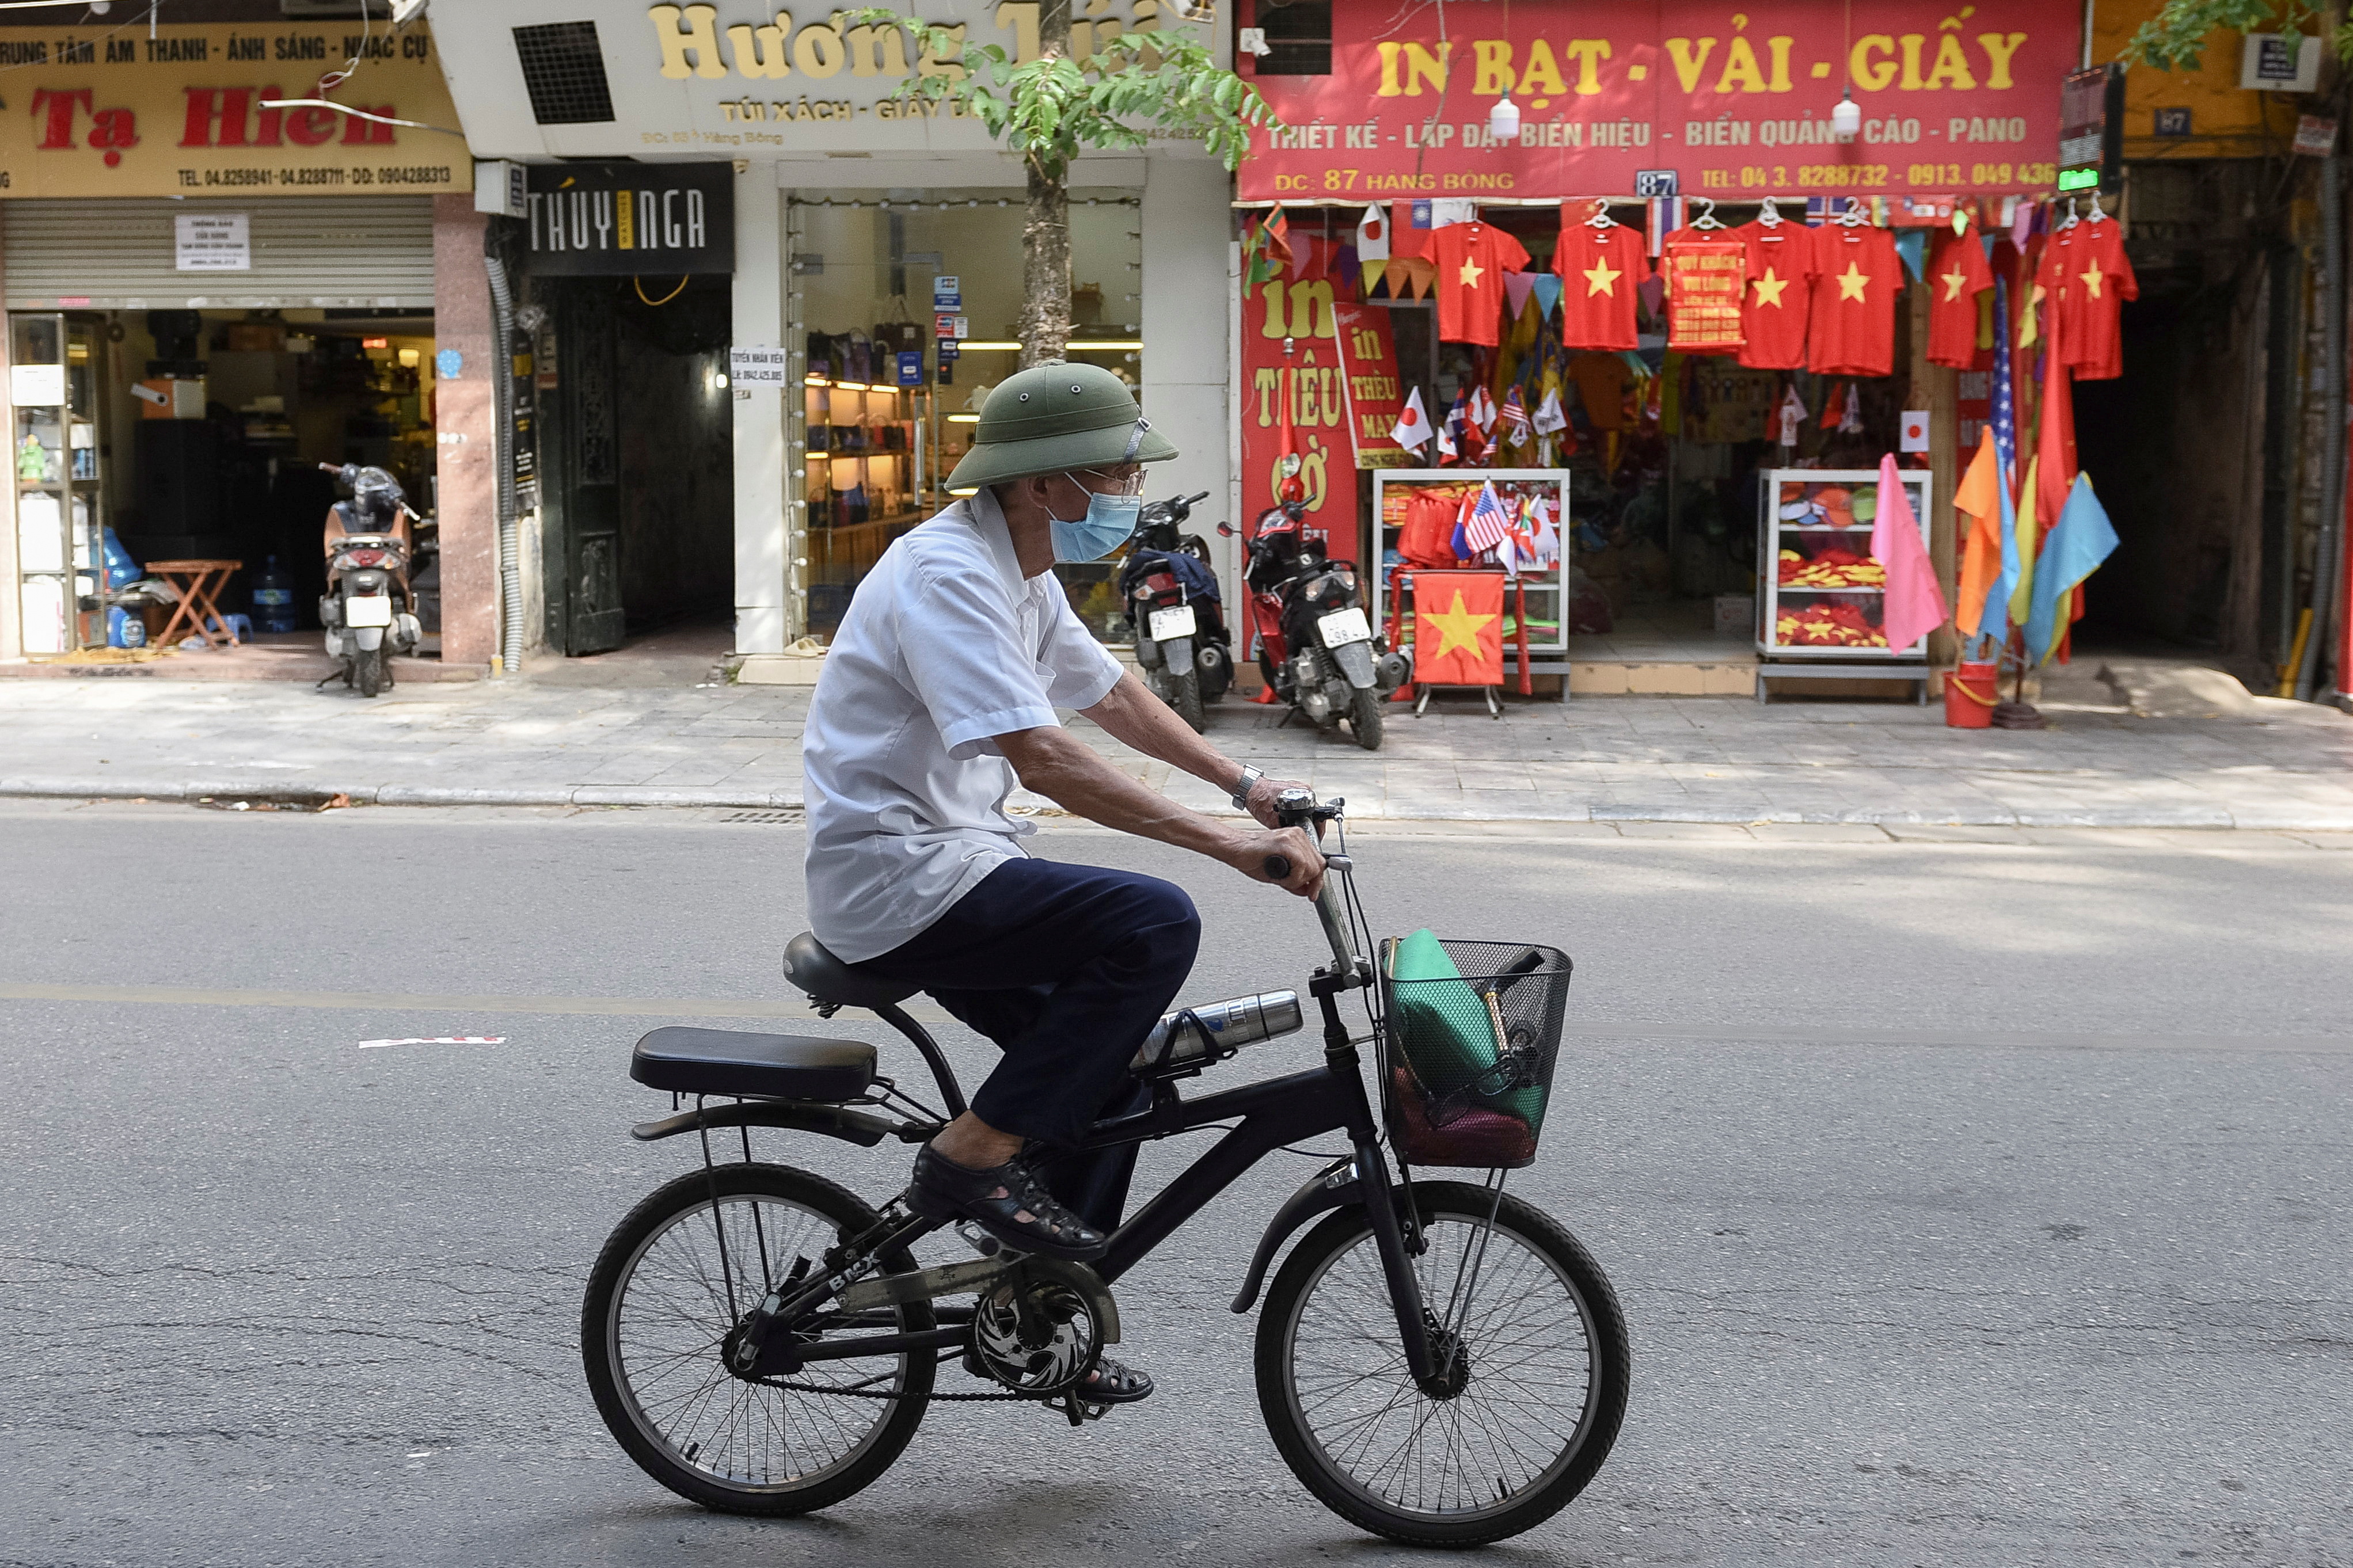 A man rides a bike on an empty street amid the coronavirus (COVID-19) pandemic, in Hanoi, Vietnam, May 31. REUTERS/Thanh Hue